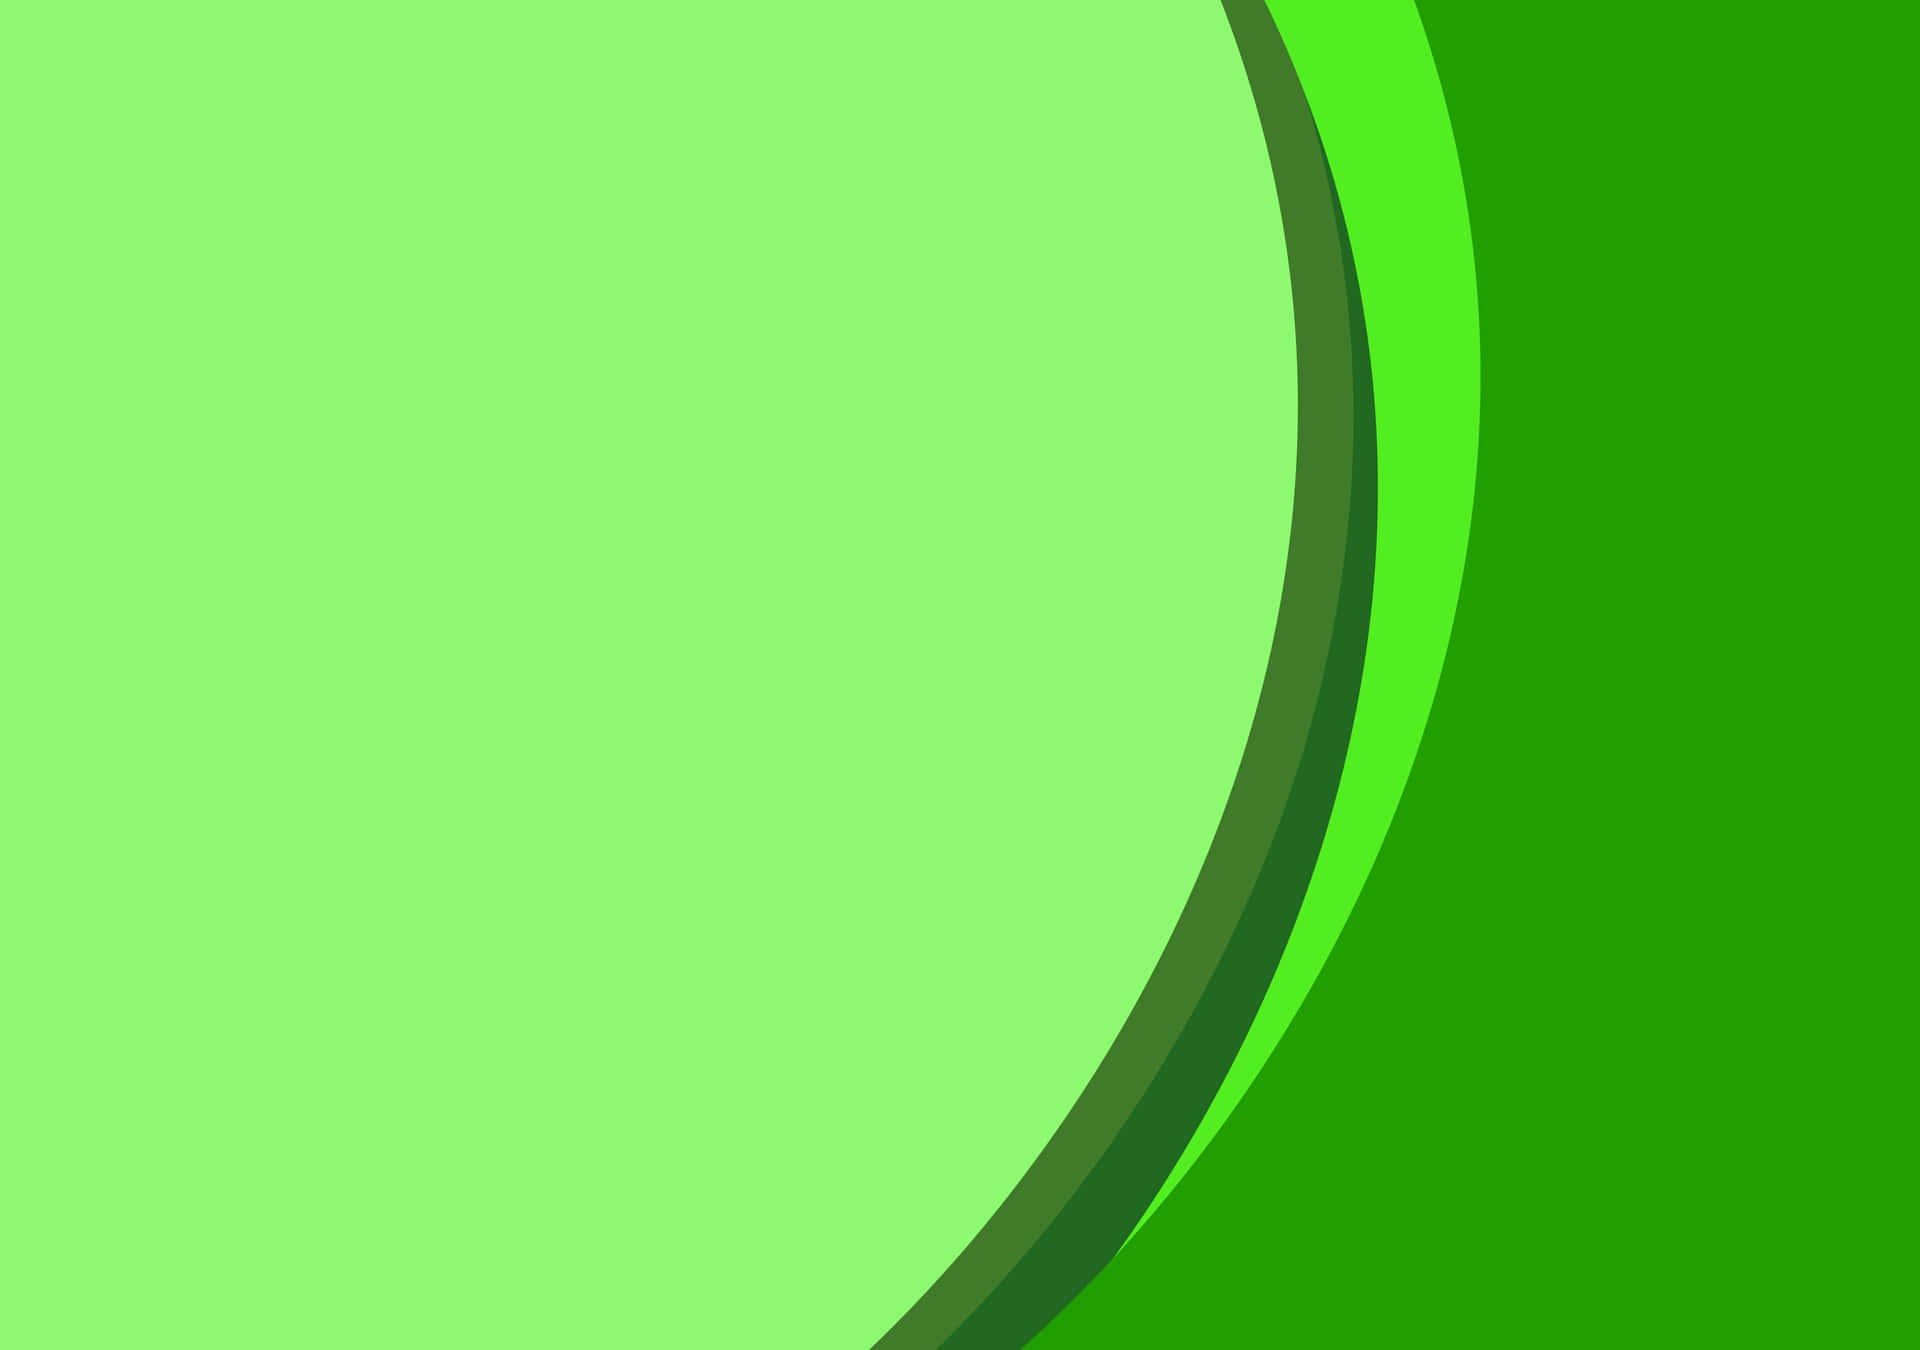 A bright and vibrant green background with a hint of yellow in the middle